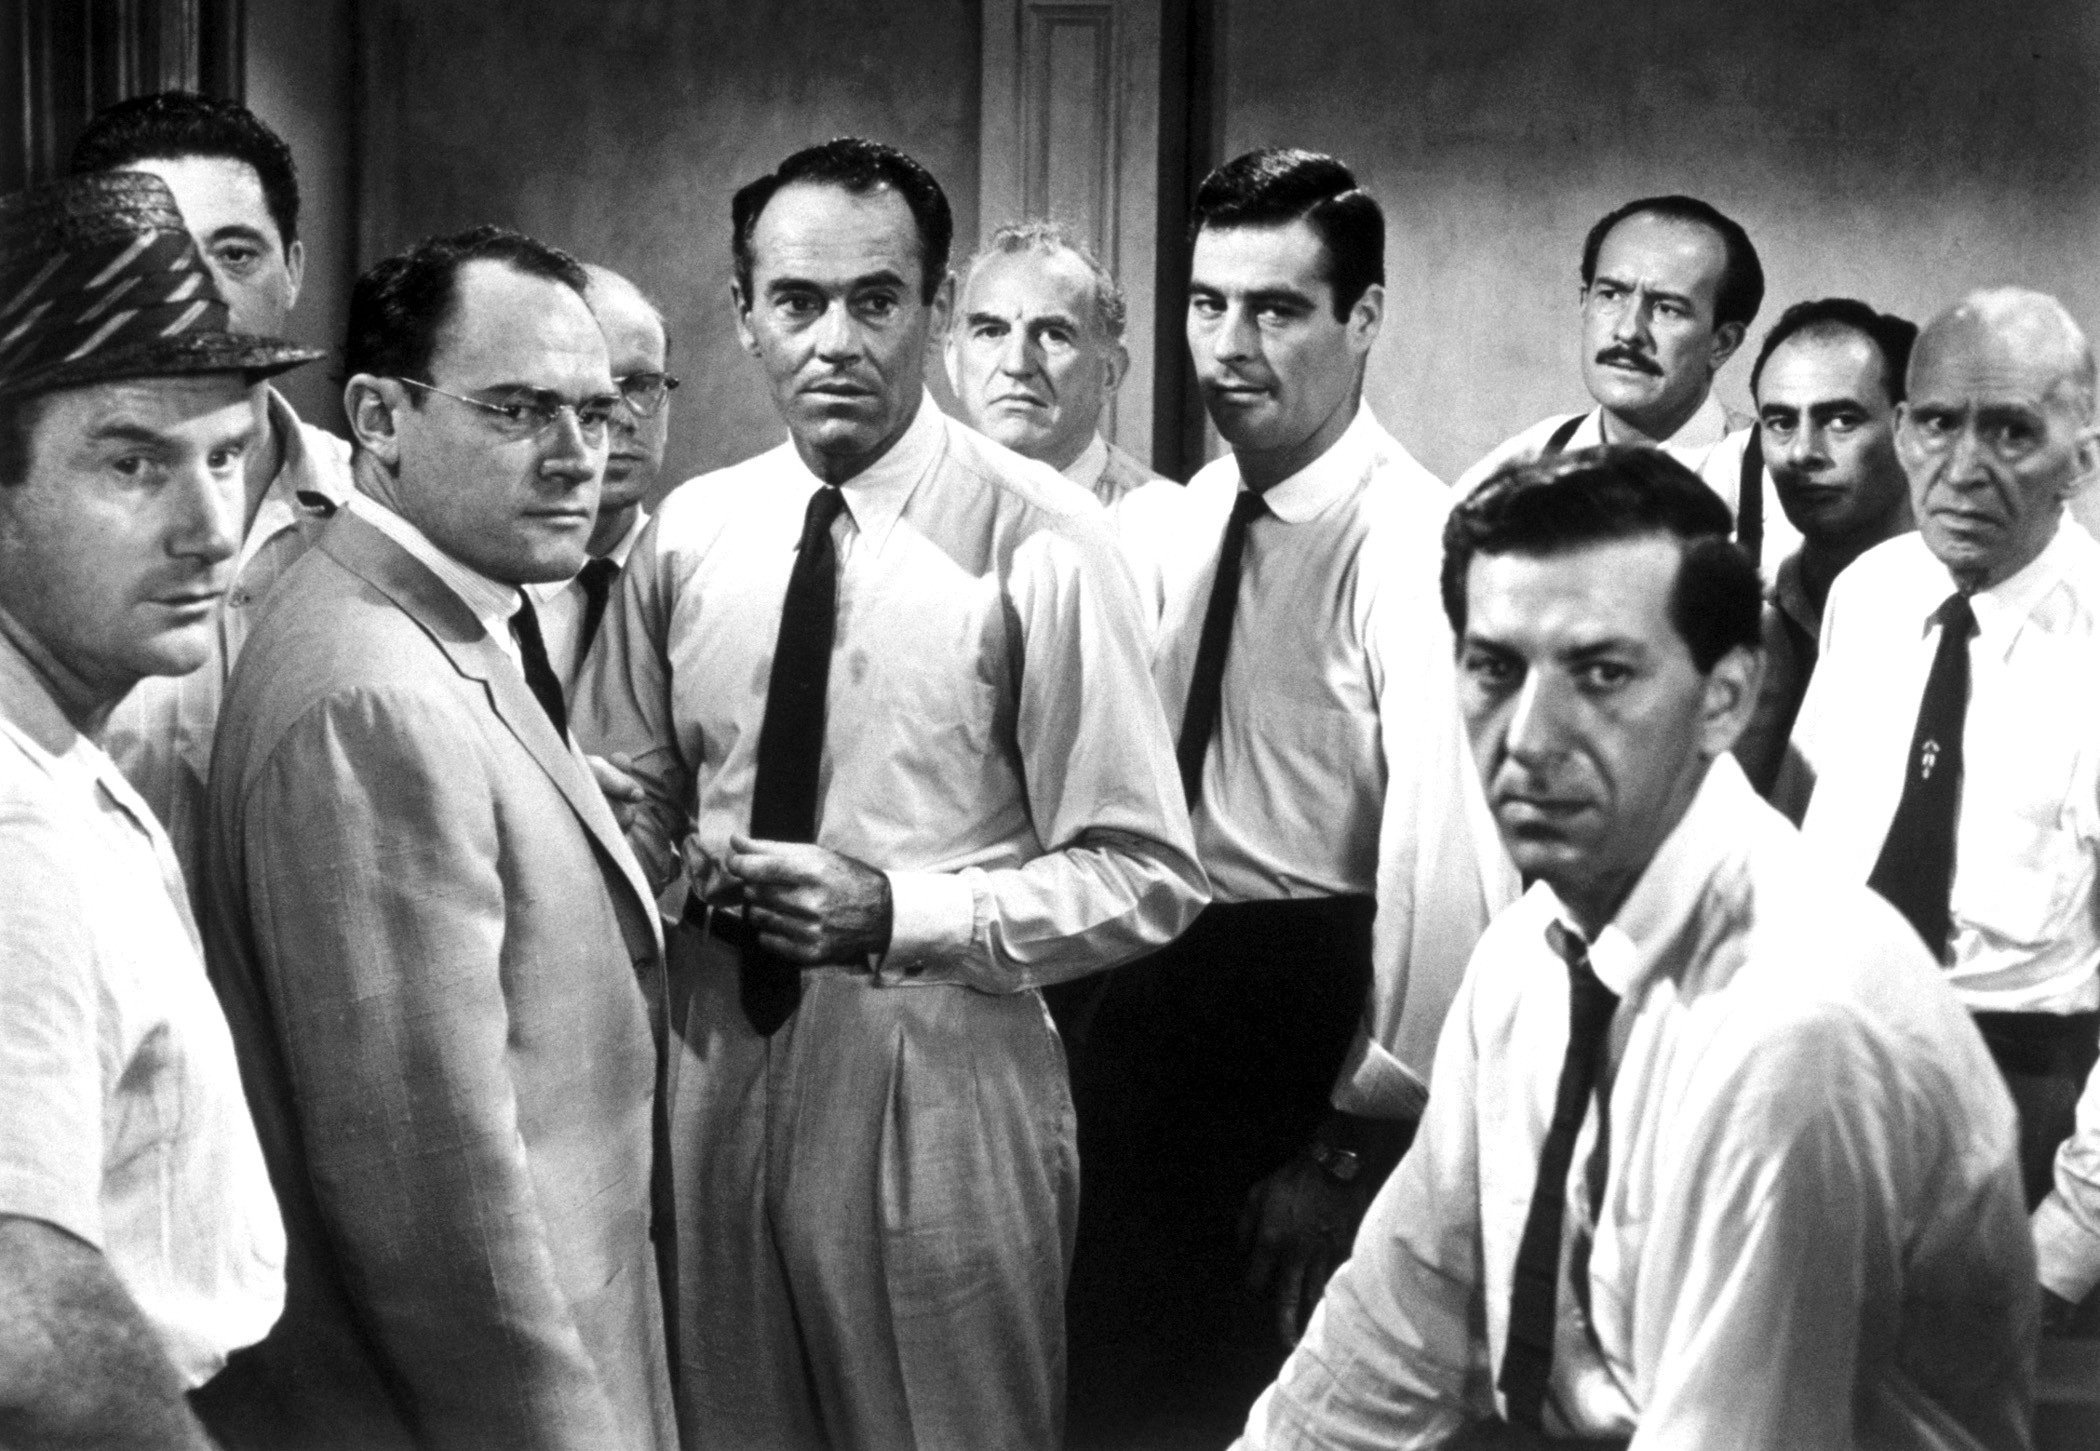 12 Angry Men (1957) - Set in one jury room, with twelve disgruntle jurors, the unraveling of what people believe to be truth and justice is put on the table. Henry Fonda plays Juror 8, the only man who thinks the young inner city boy, who is accused of stabbing his father, is innocent. Over the course of the day, he tries to convince the other men that there are way too many discrepancies with the story to convict the teen.
